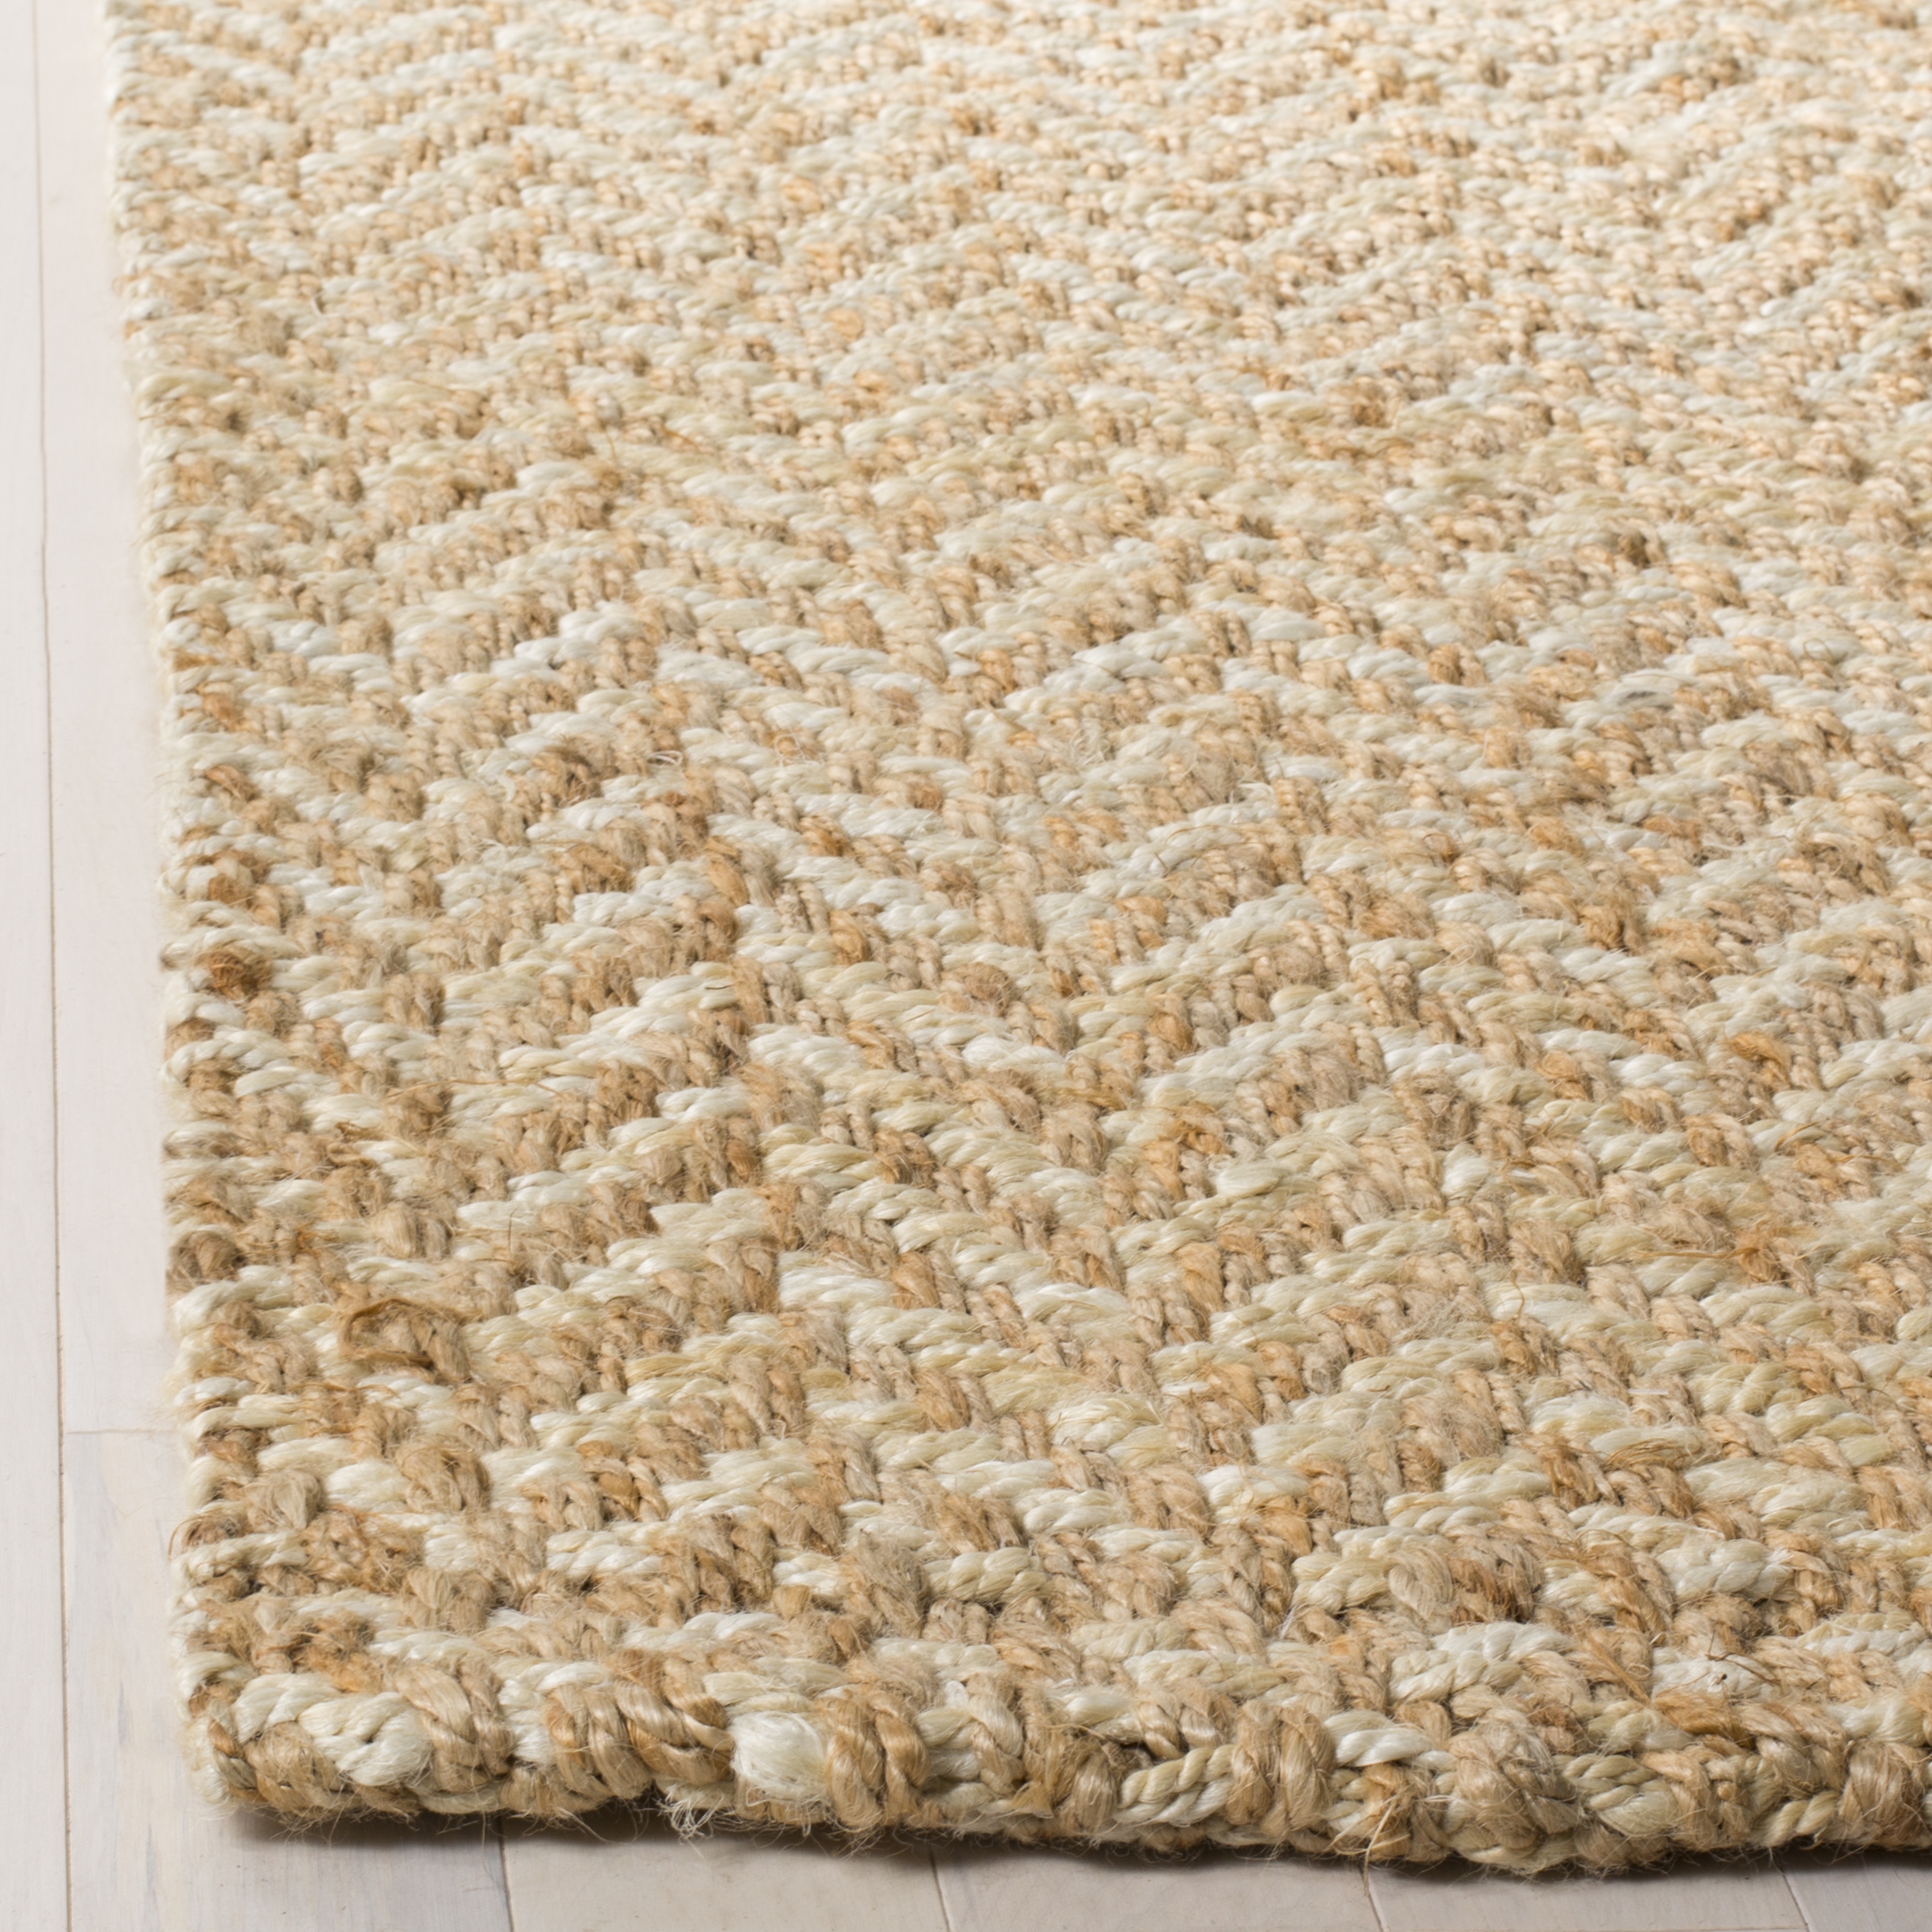 Arlo Home Hand Woven Area Rug, NF264A, Ivory/Natural,  10' X 14' - Image 1